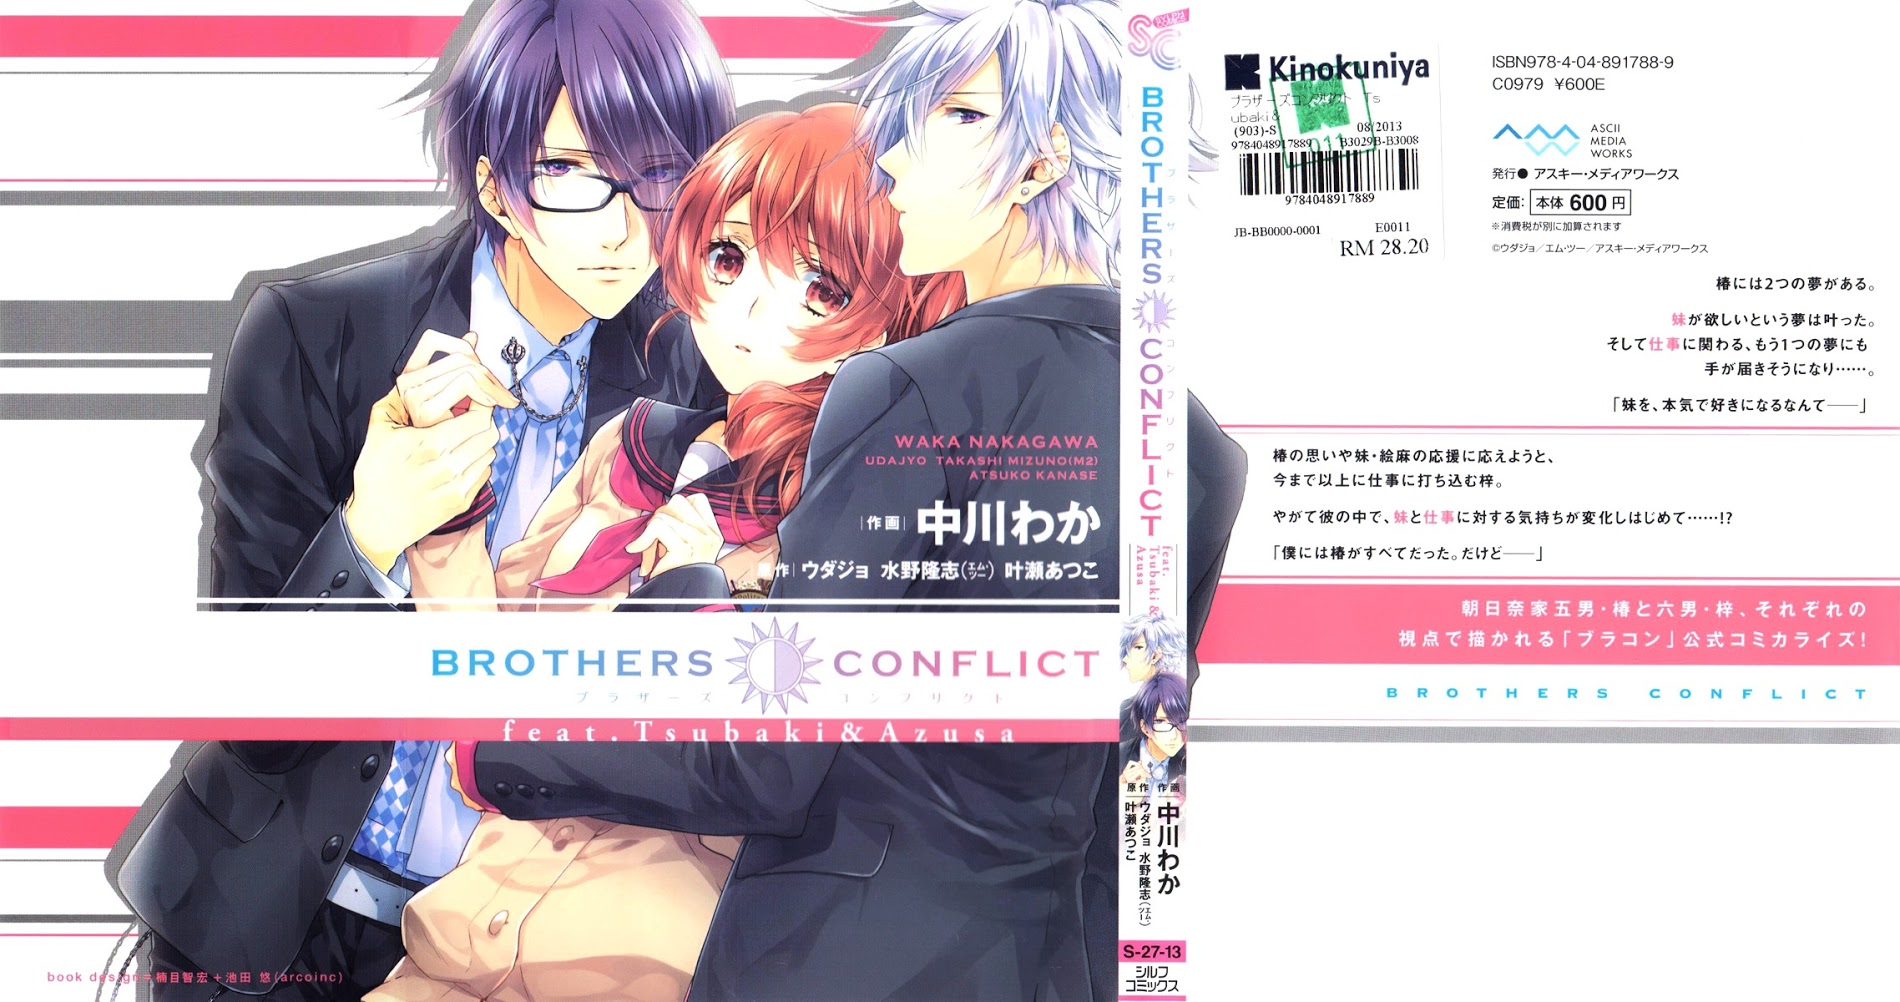 Brothers Conflict Feat. Tsubaki & Azusa Chapter 1 #1